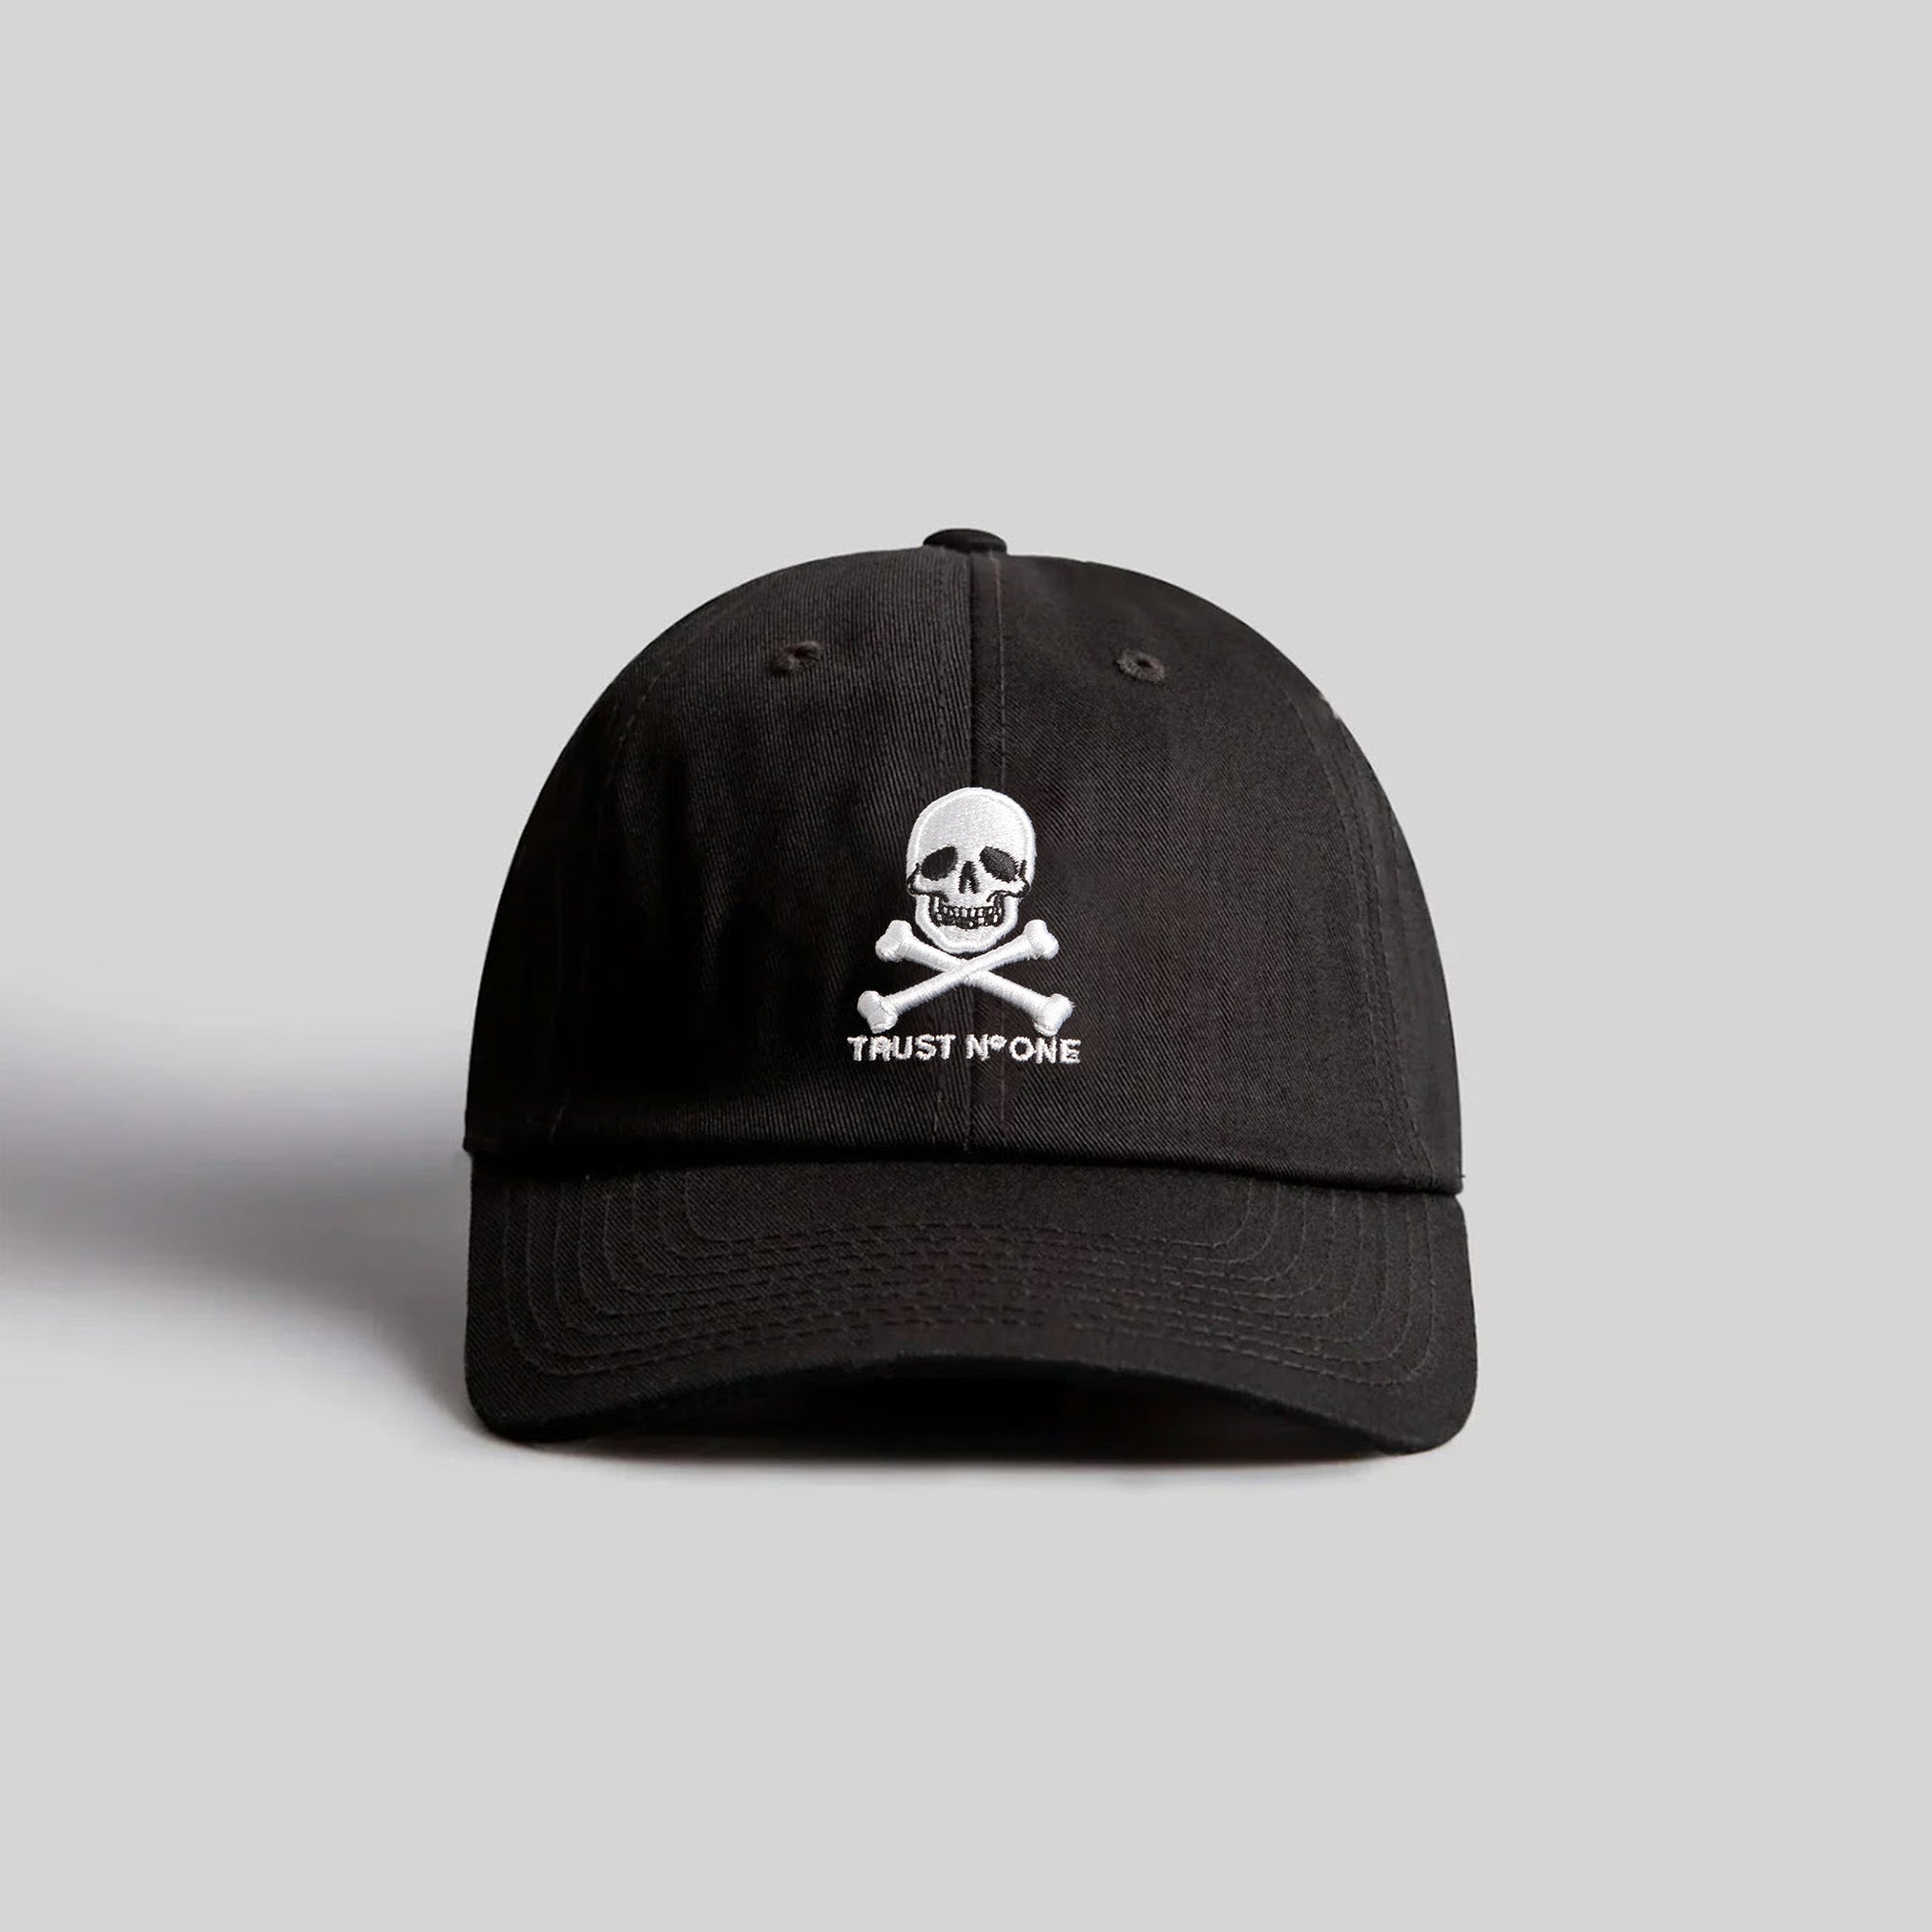 TRUST NO ONE BLACK RELAXED FIT HAT